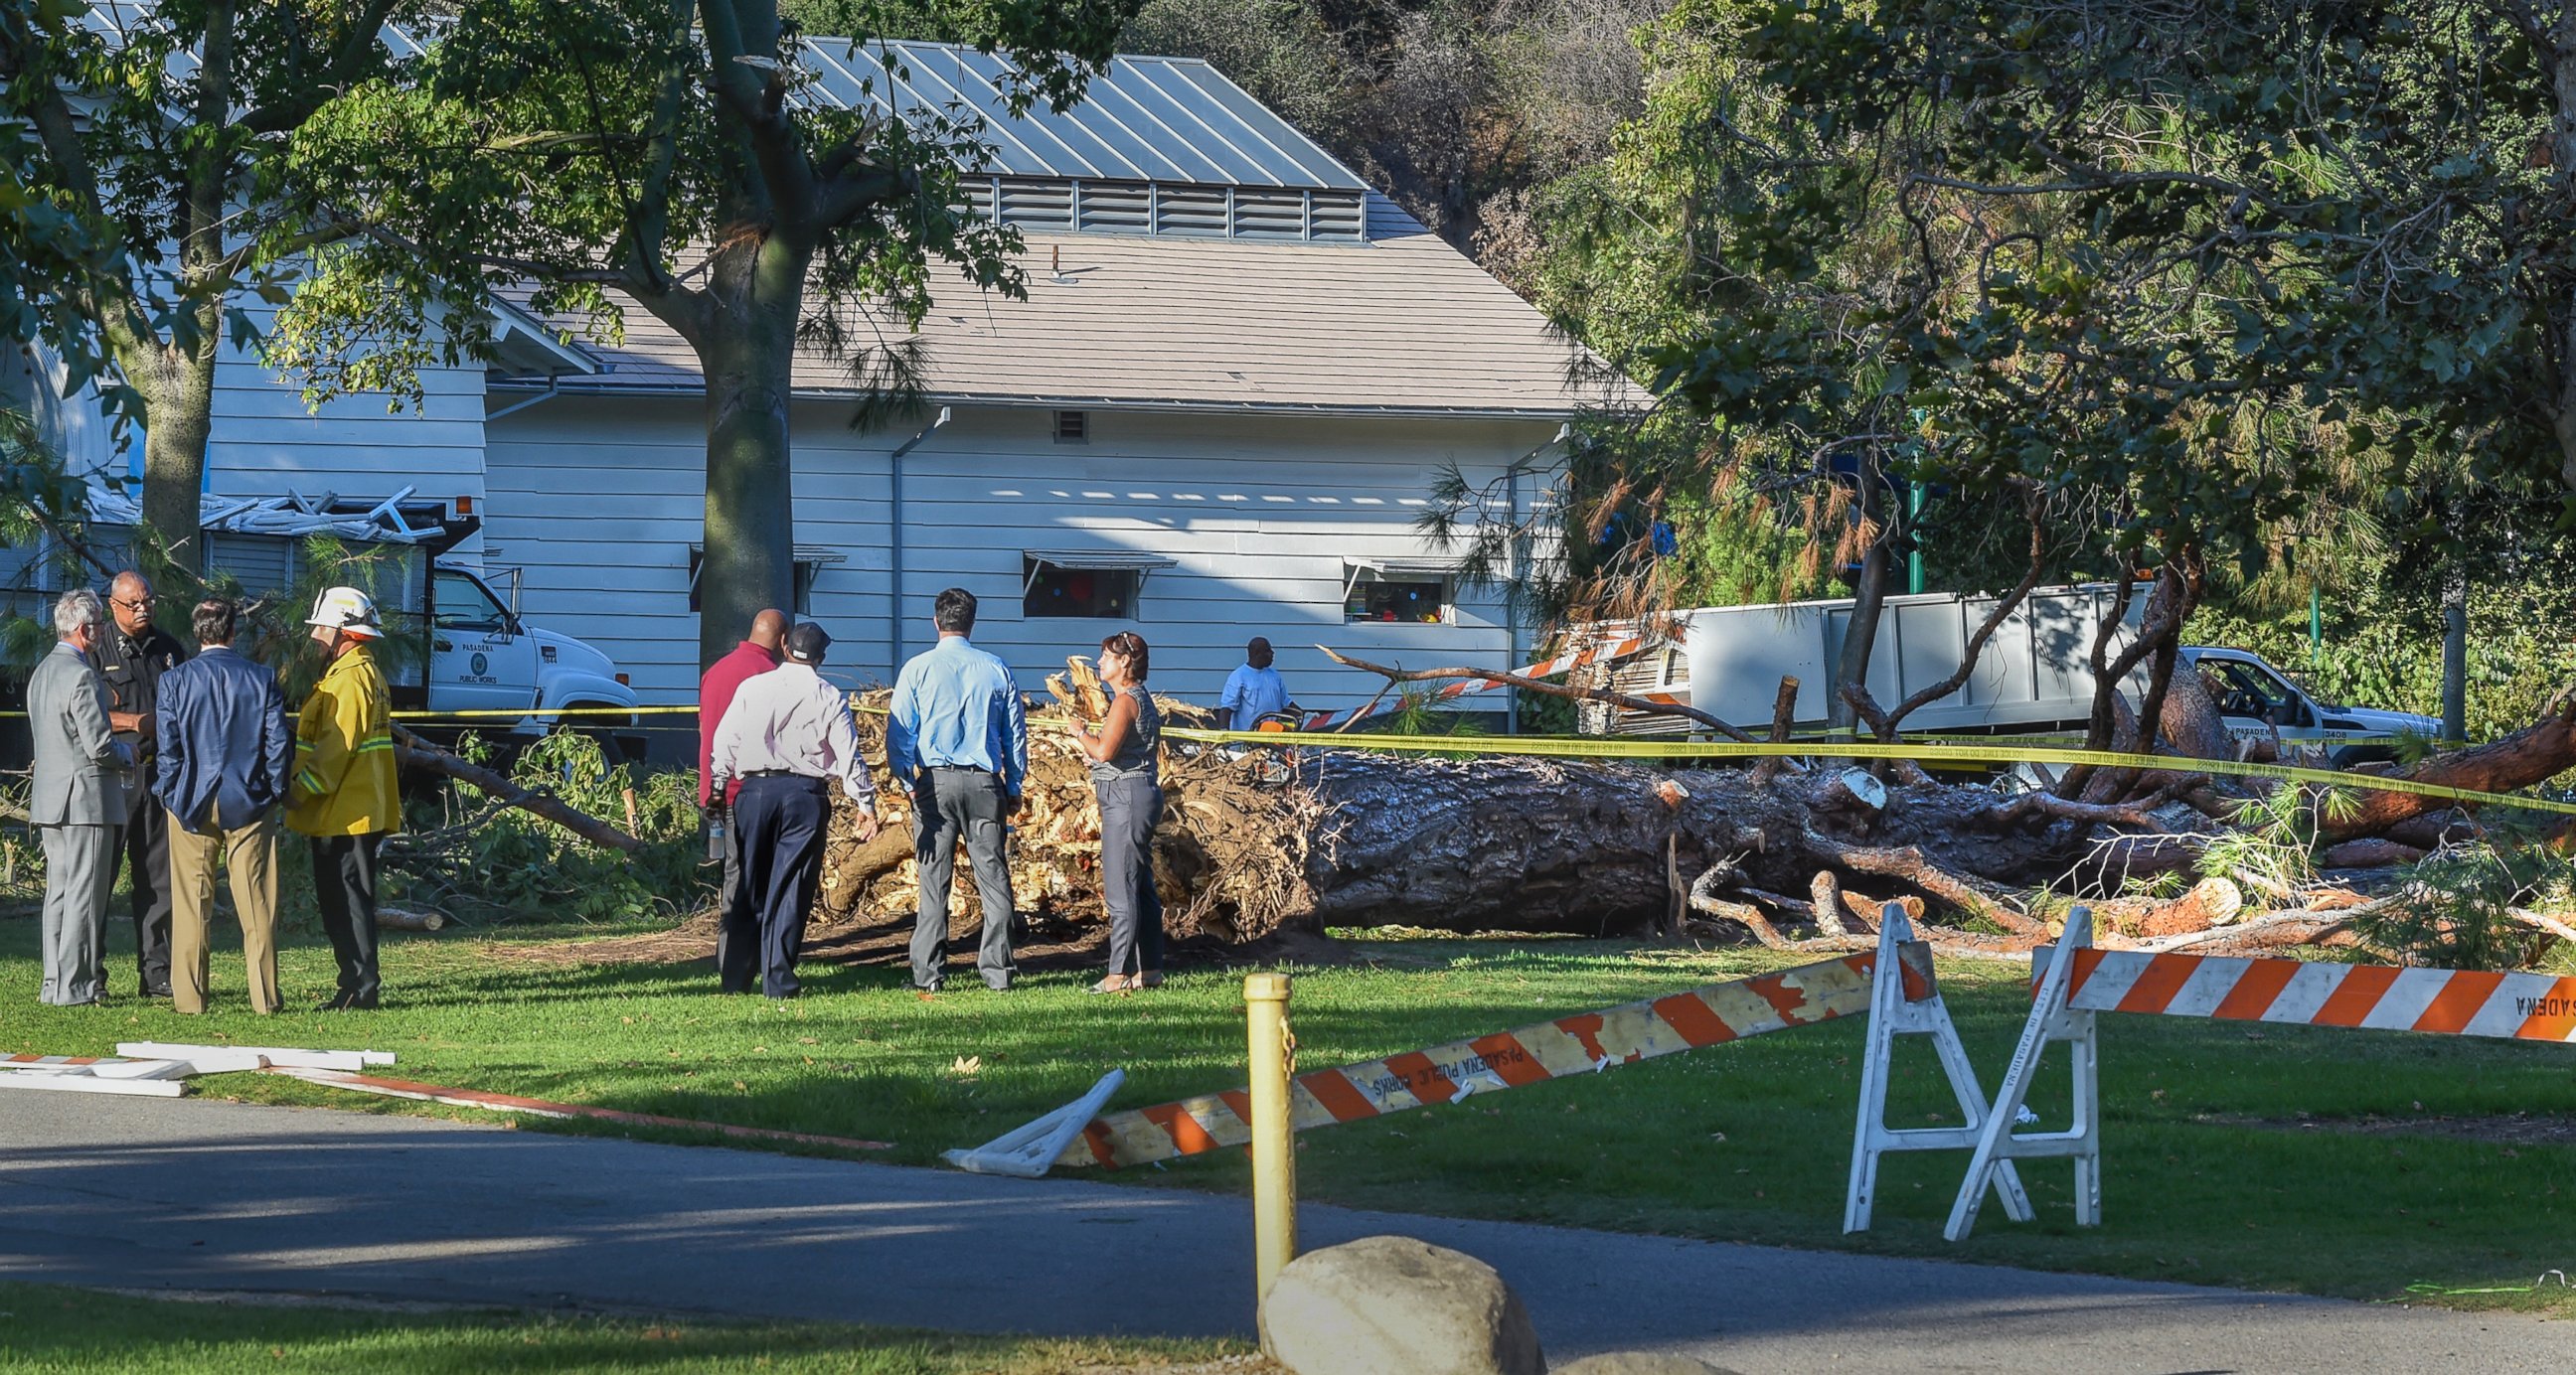 PHOTO: Officials stand by a tree that fell near the Kidspace Children's Museum in Pasadena, Calif., Tuesday, July 28, 2015. Witnesses say the tree came down on children just as a summer day camp at the museum was letting out for the day.